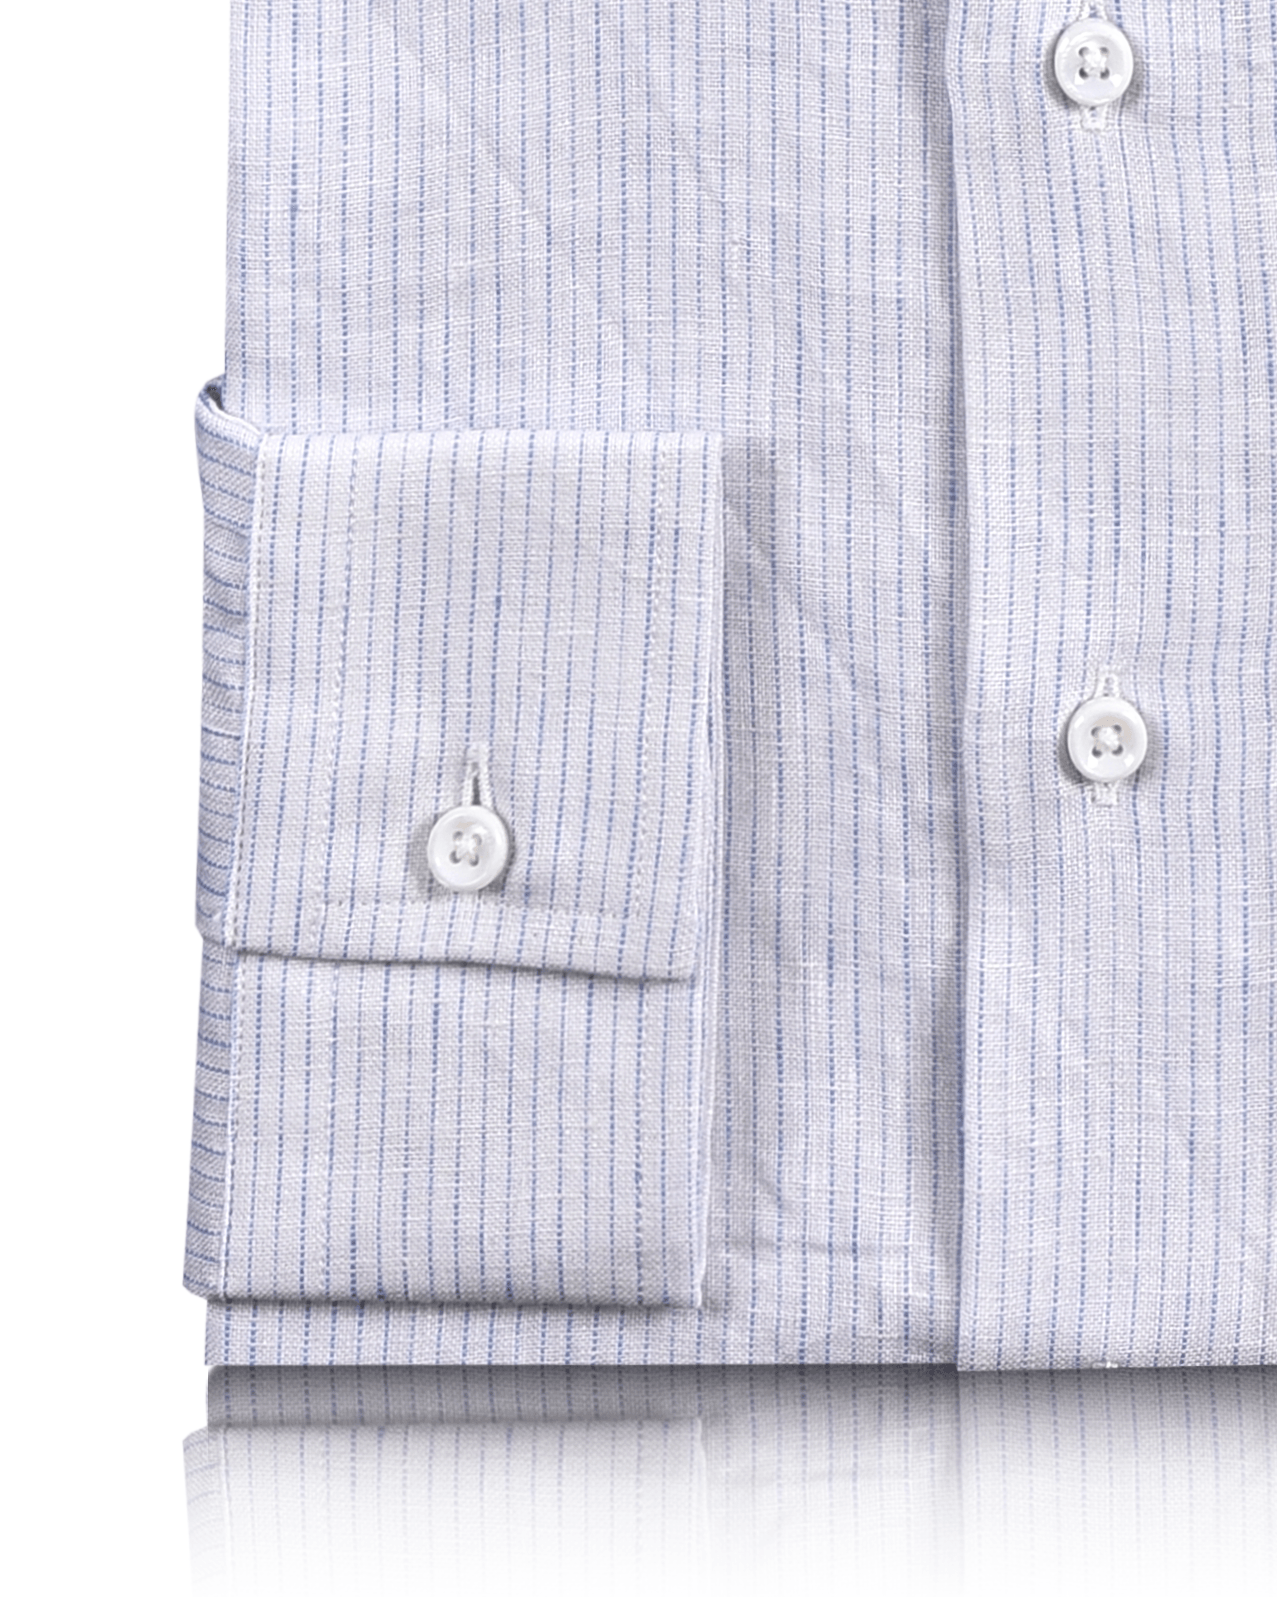 Cuff of the custom linen shirt for men in white with thin blue stripes by Luxire Clothing